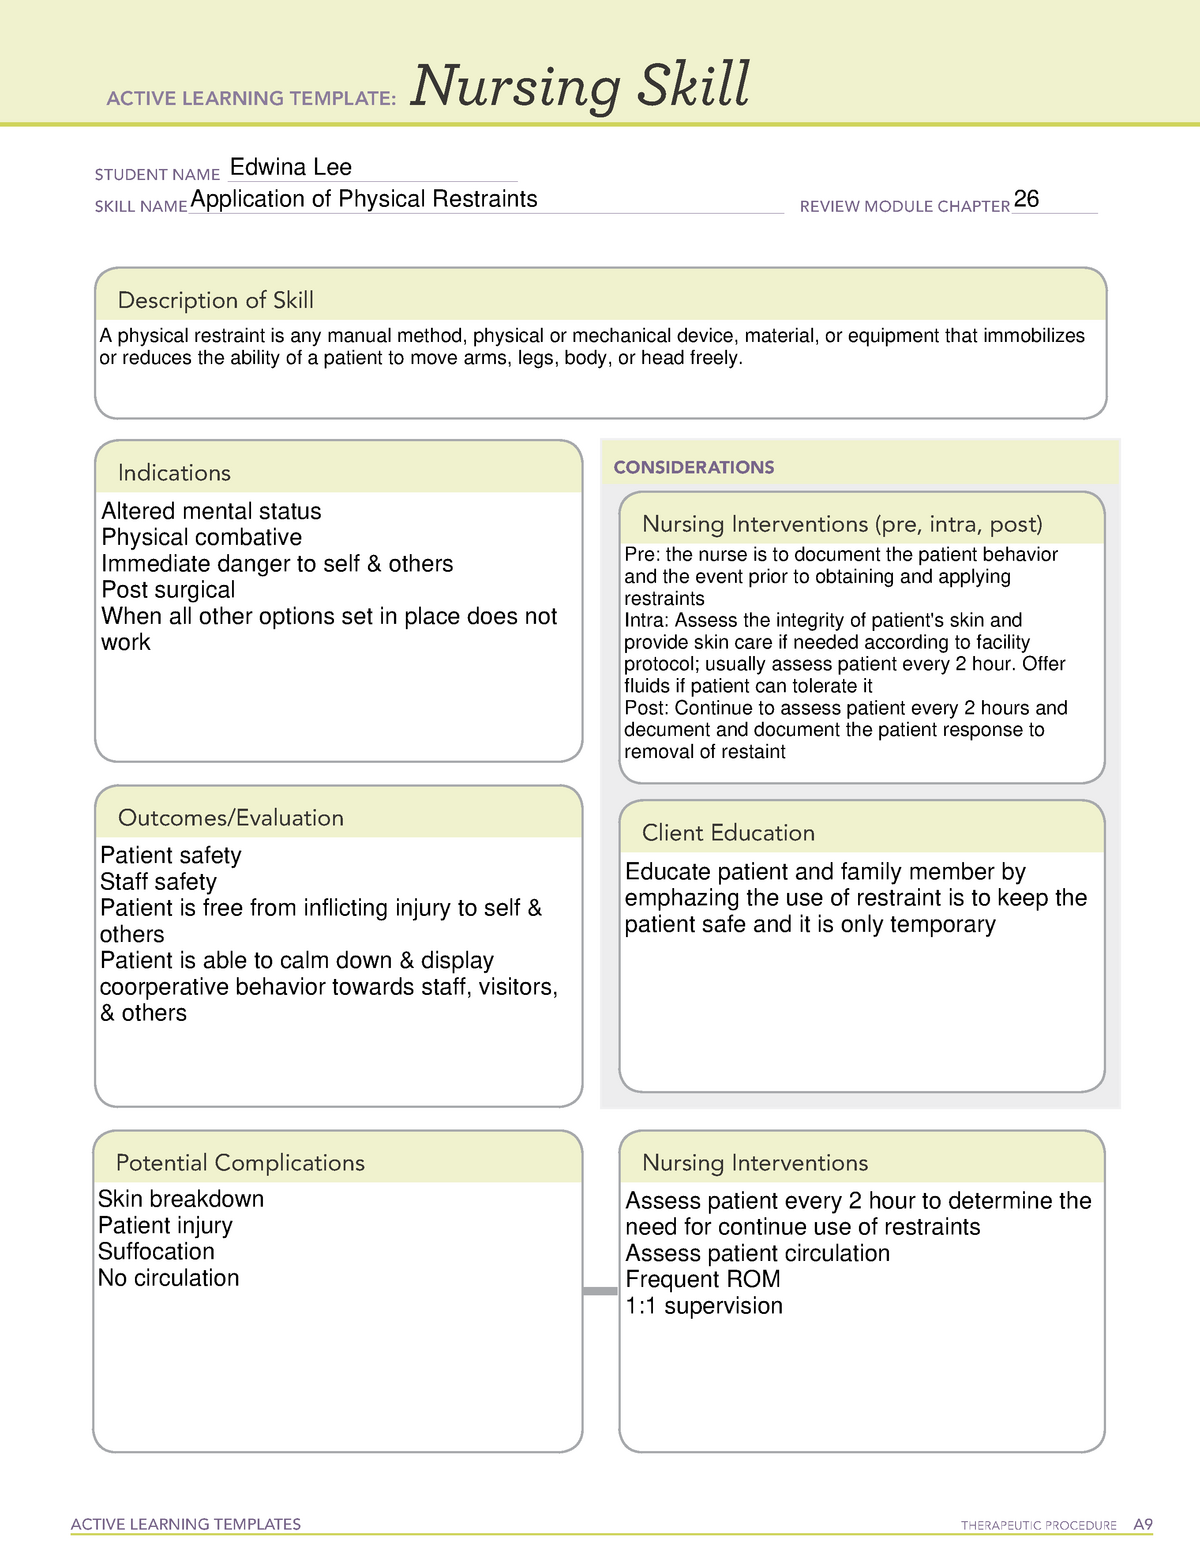 Active Learning Template Nursing Skill Restraints ACTIVE LEARNING